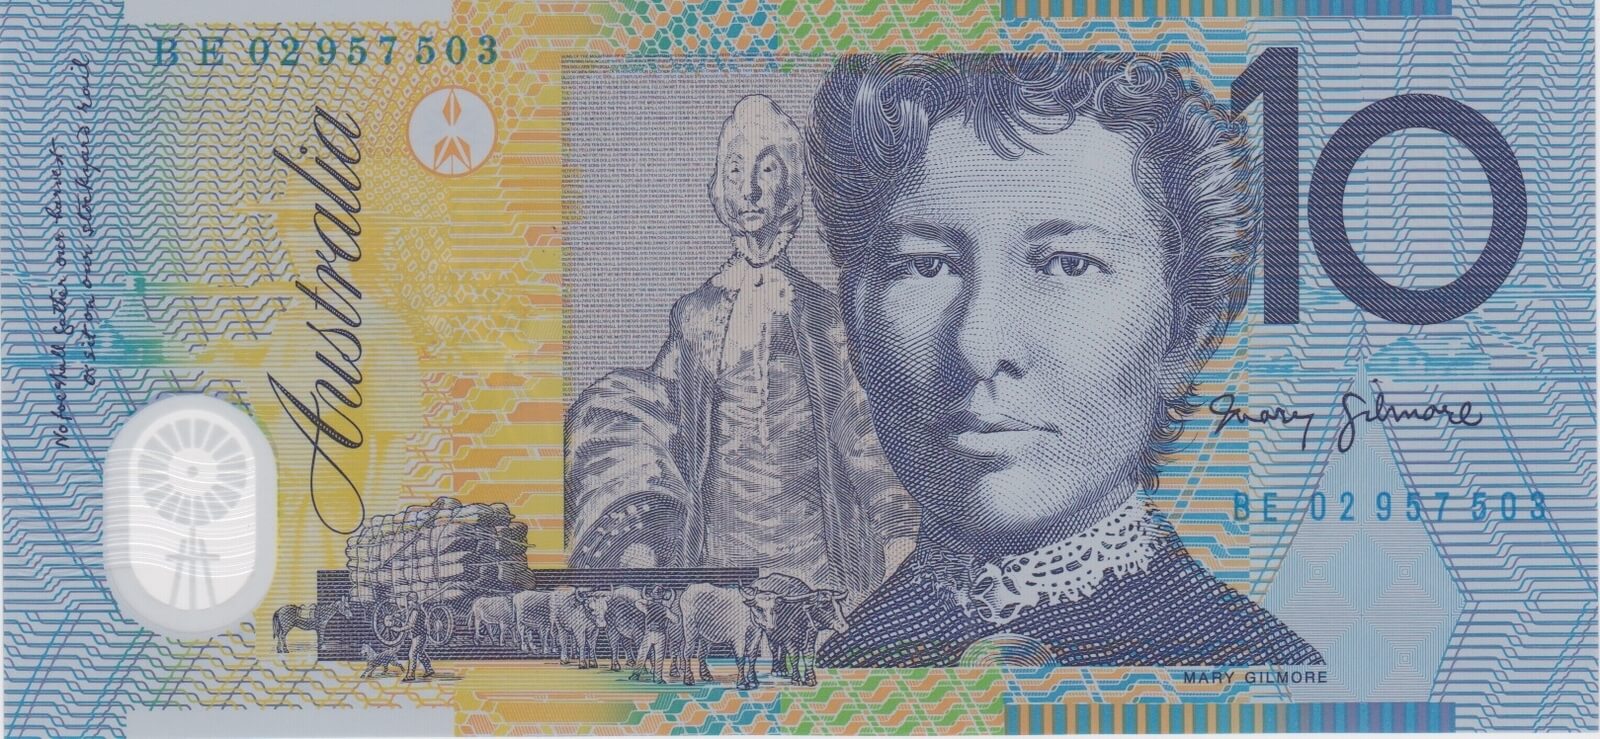 2002 $10 Note Macfarlane/Henry Standard Prefix R320a Uncirculated product image